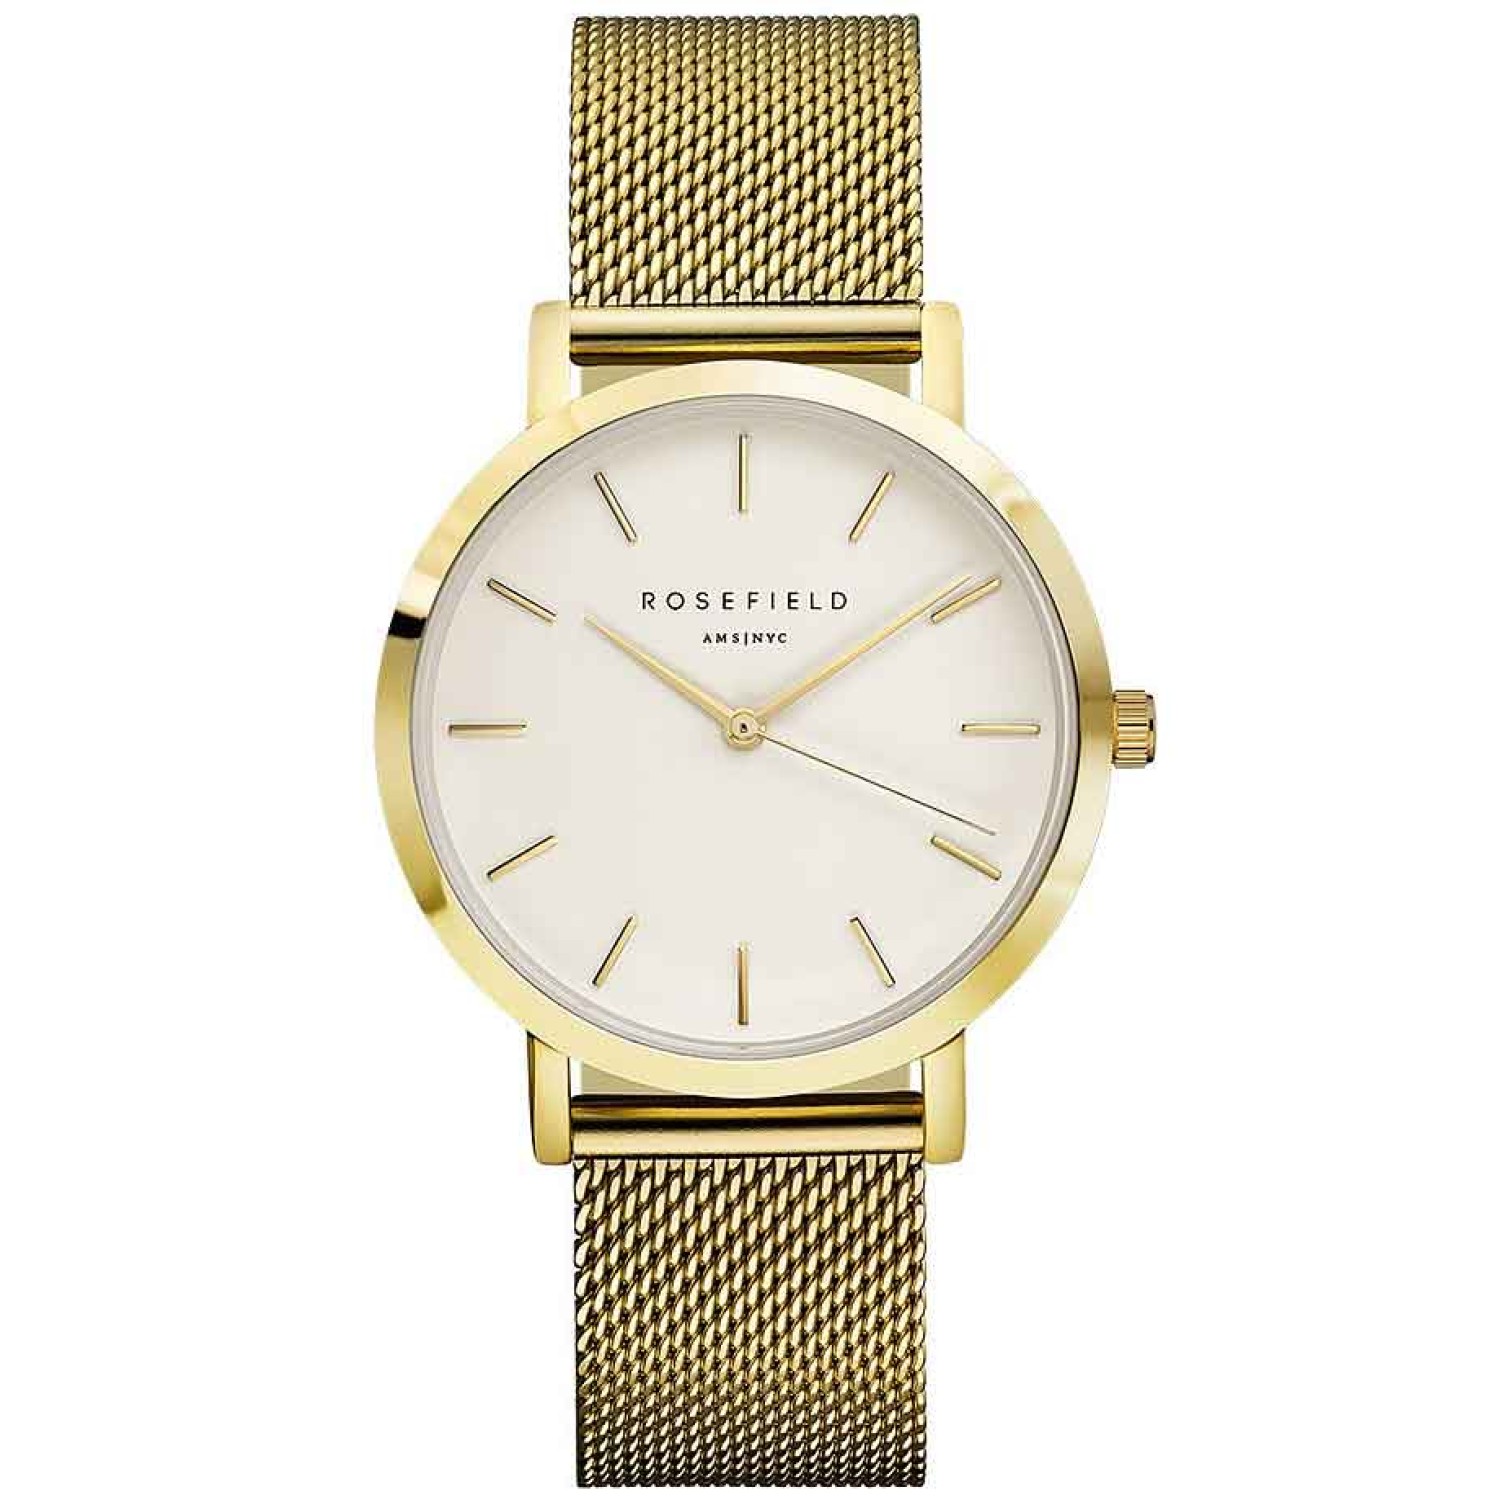 MWG-M41 Rosefield Gold The Mercer Mesh Watch. The Mercer: Paying tribute to an exciting street in one of NYC’s signature shopping destinations, the MERCER collection features stainless steel mesh straps for an exquisite look that suits this fashionable ne